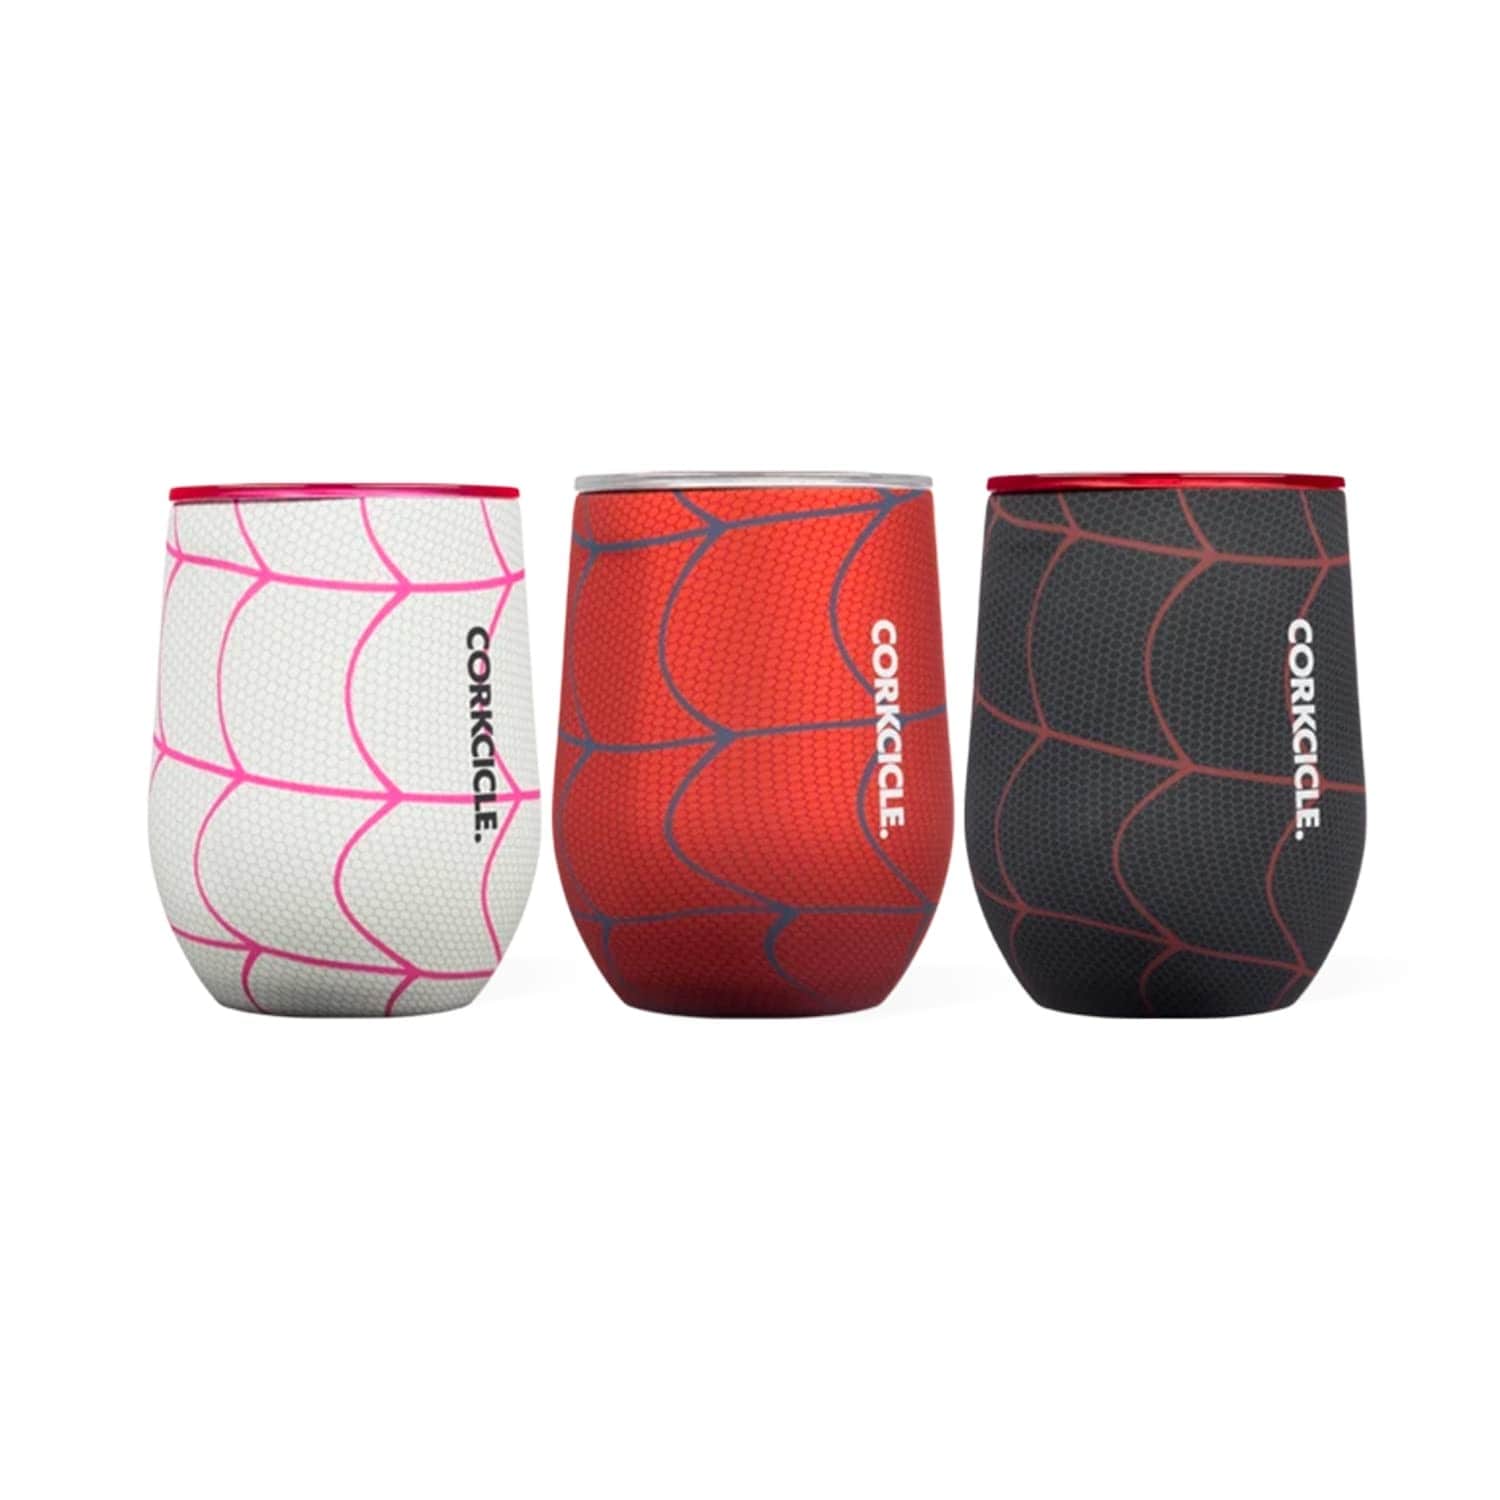 https://ak1.ostkcdn.com/images/products/is/images/direct/74adb0fcb2d238bd3a308a2352ed904c9ffe07b1/Marvel-Spiderman%2C-Insulated-Tumbler-Gift-Set%2C-Triple-Insulated-Stainless-Steel-Construction%2C-Keeps-Beverages-Chilled%2C-12-oz.jpg